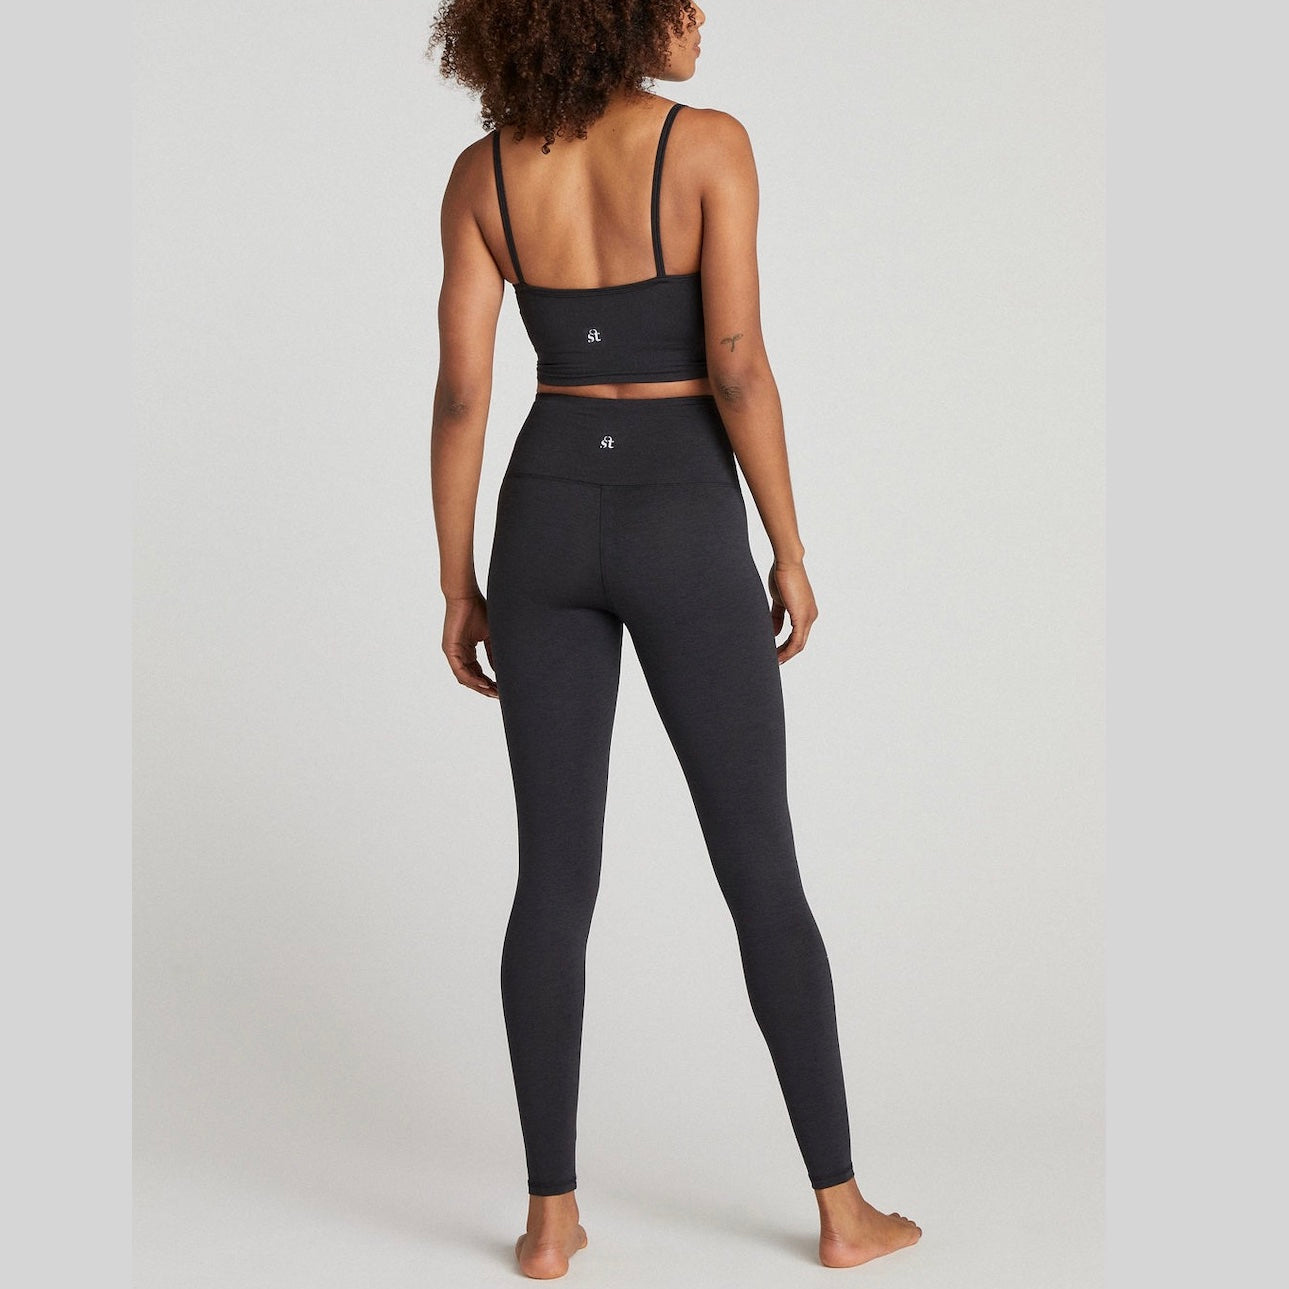 The Lovers Ankle Leggings - Strut This - simplyWORKOUT – SIMPLYWORKOUT